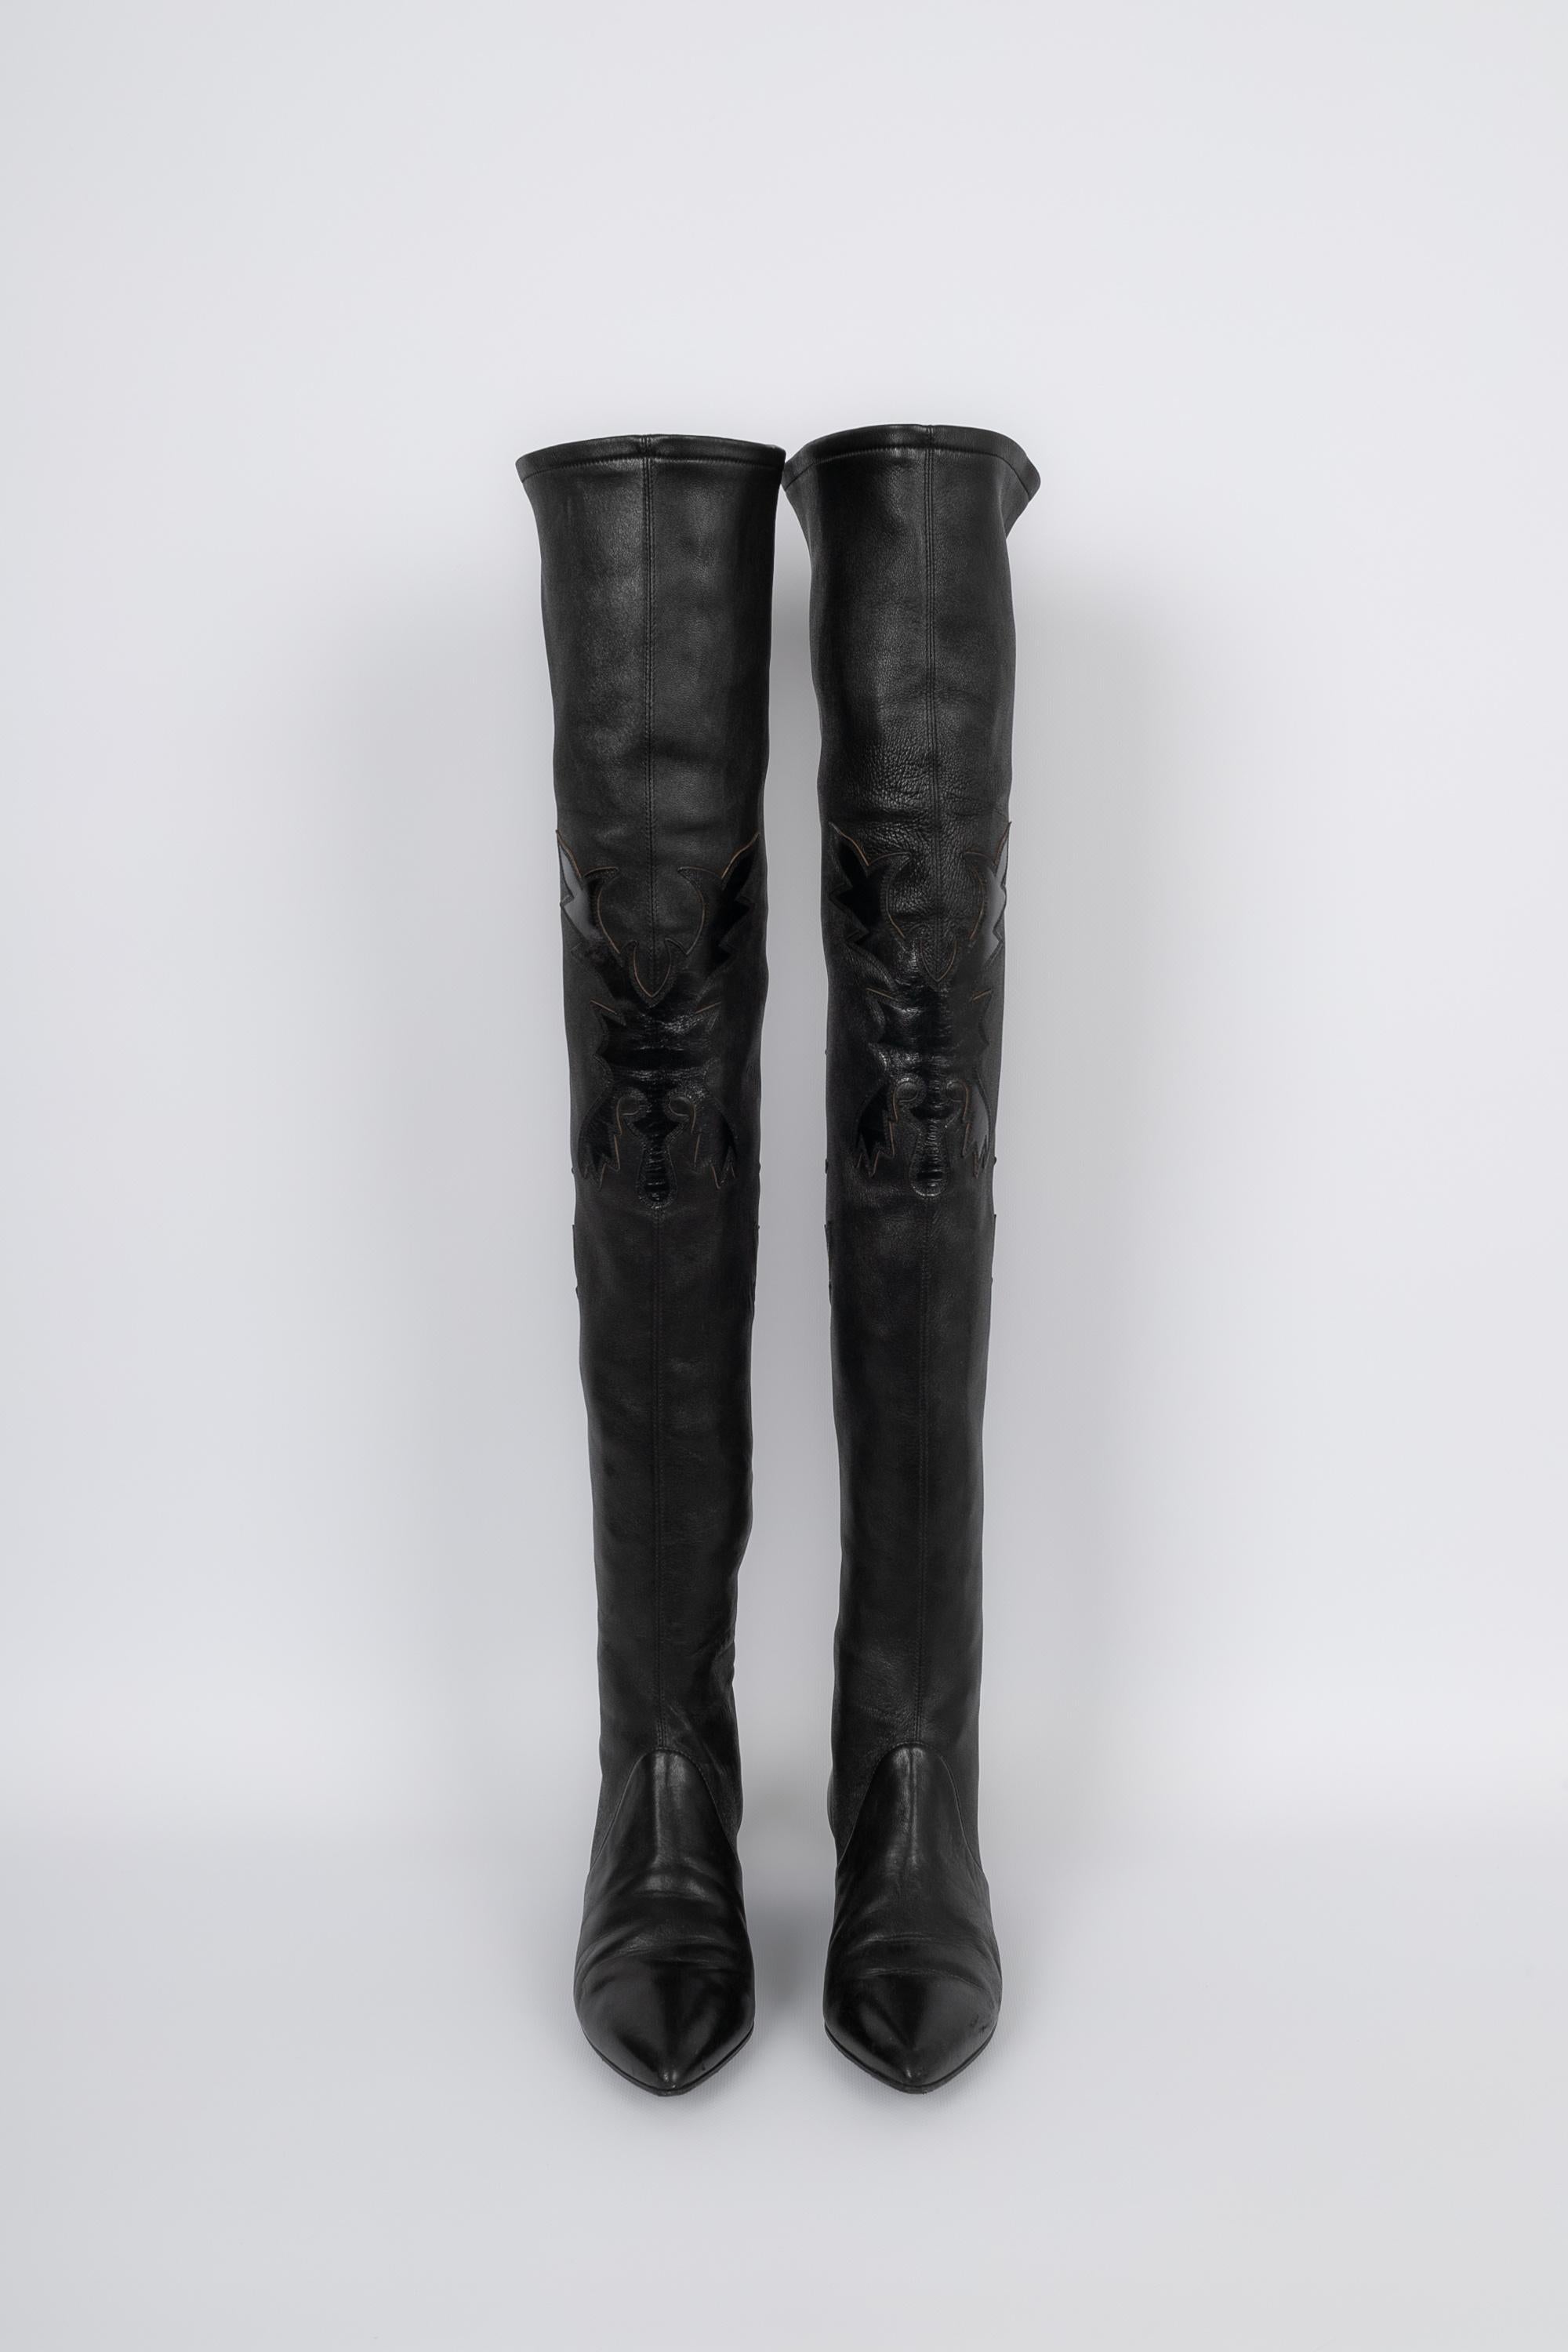 CHANEL - (Made in Italy) Black lambskin cowboy thigh-high boots with patterns. 37.5 FR size indication. To be mentioned, the soles of the shoes are slightly rubbed.

Condition:
Very good condition

Dimensions:
Height: about 70 cm (with the